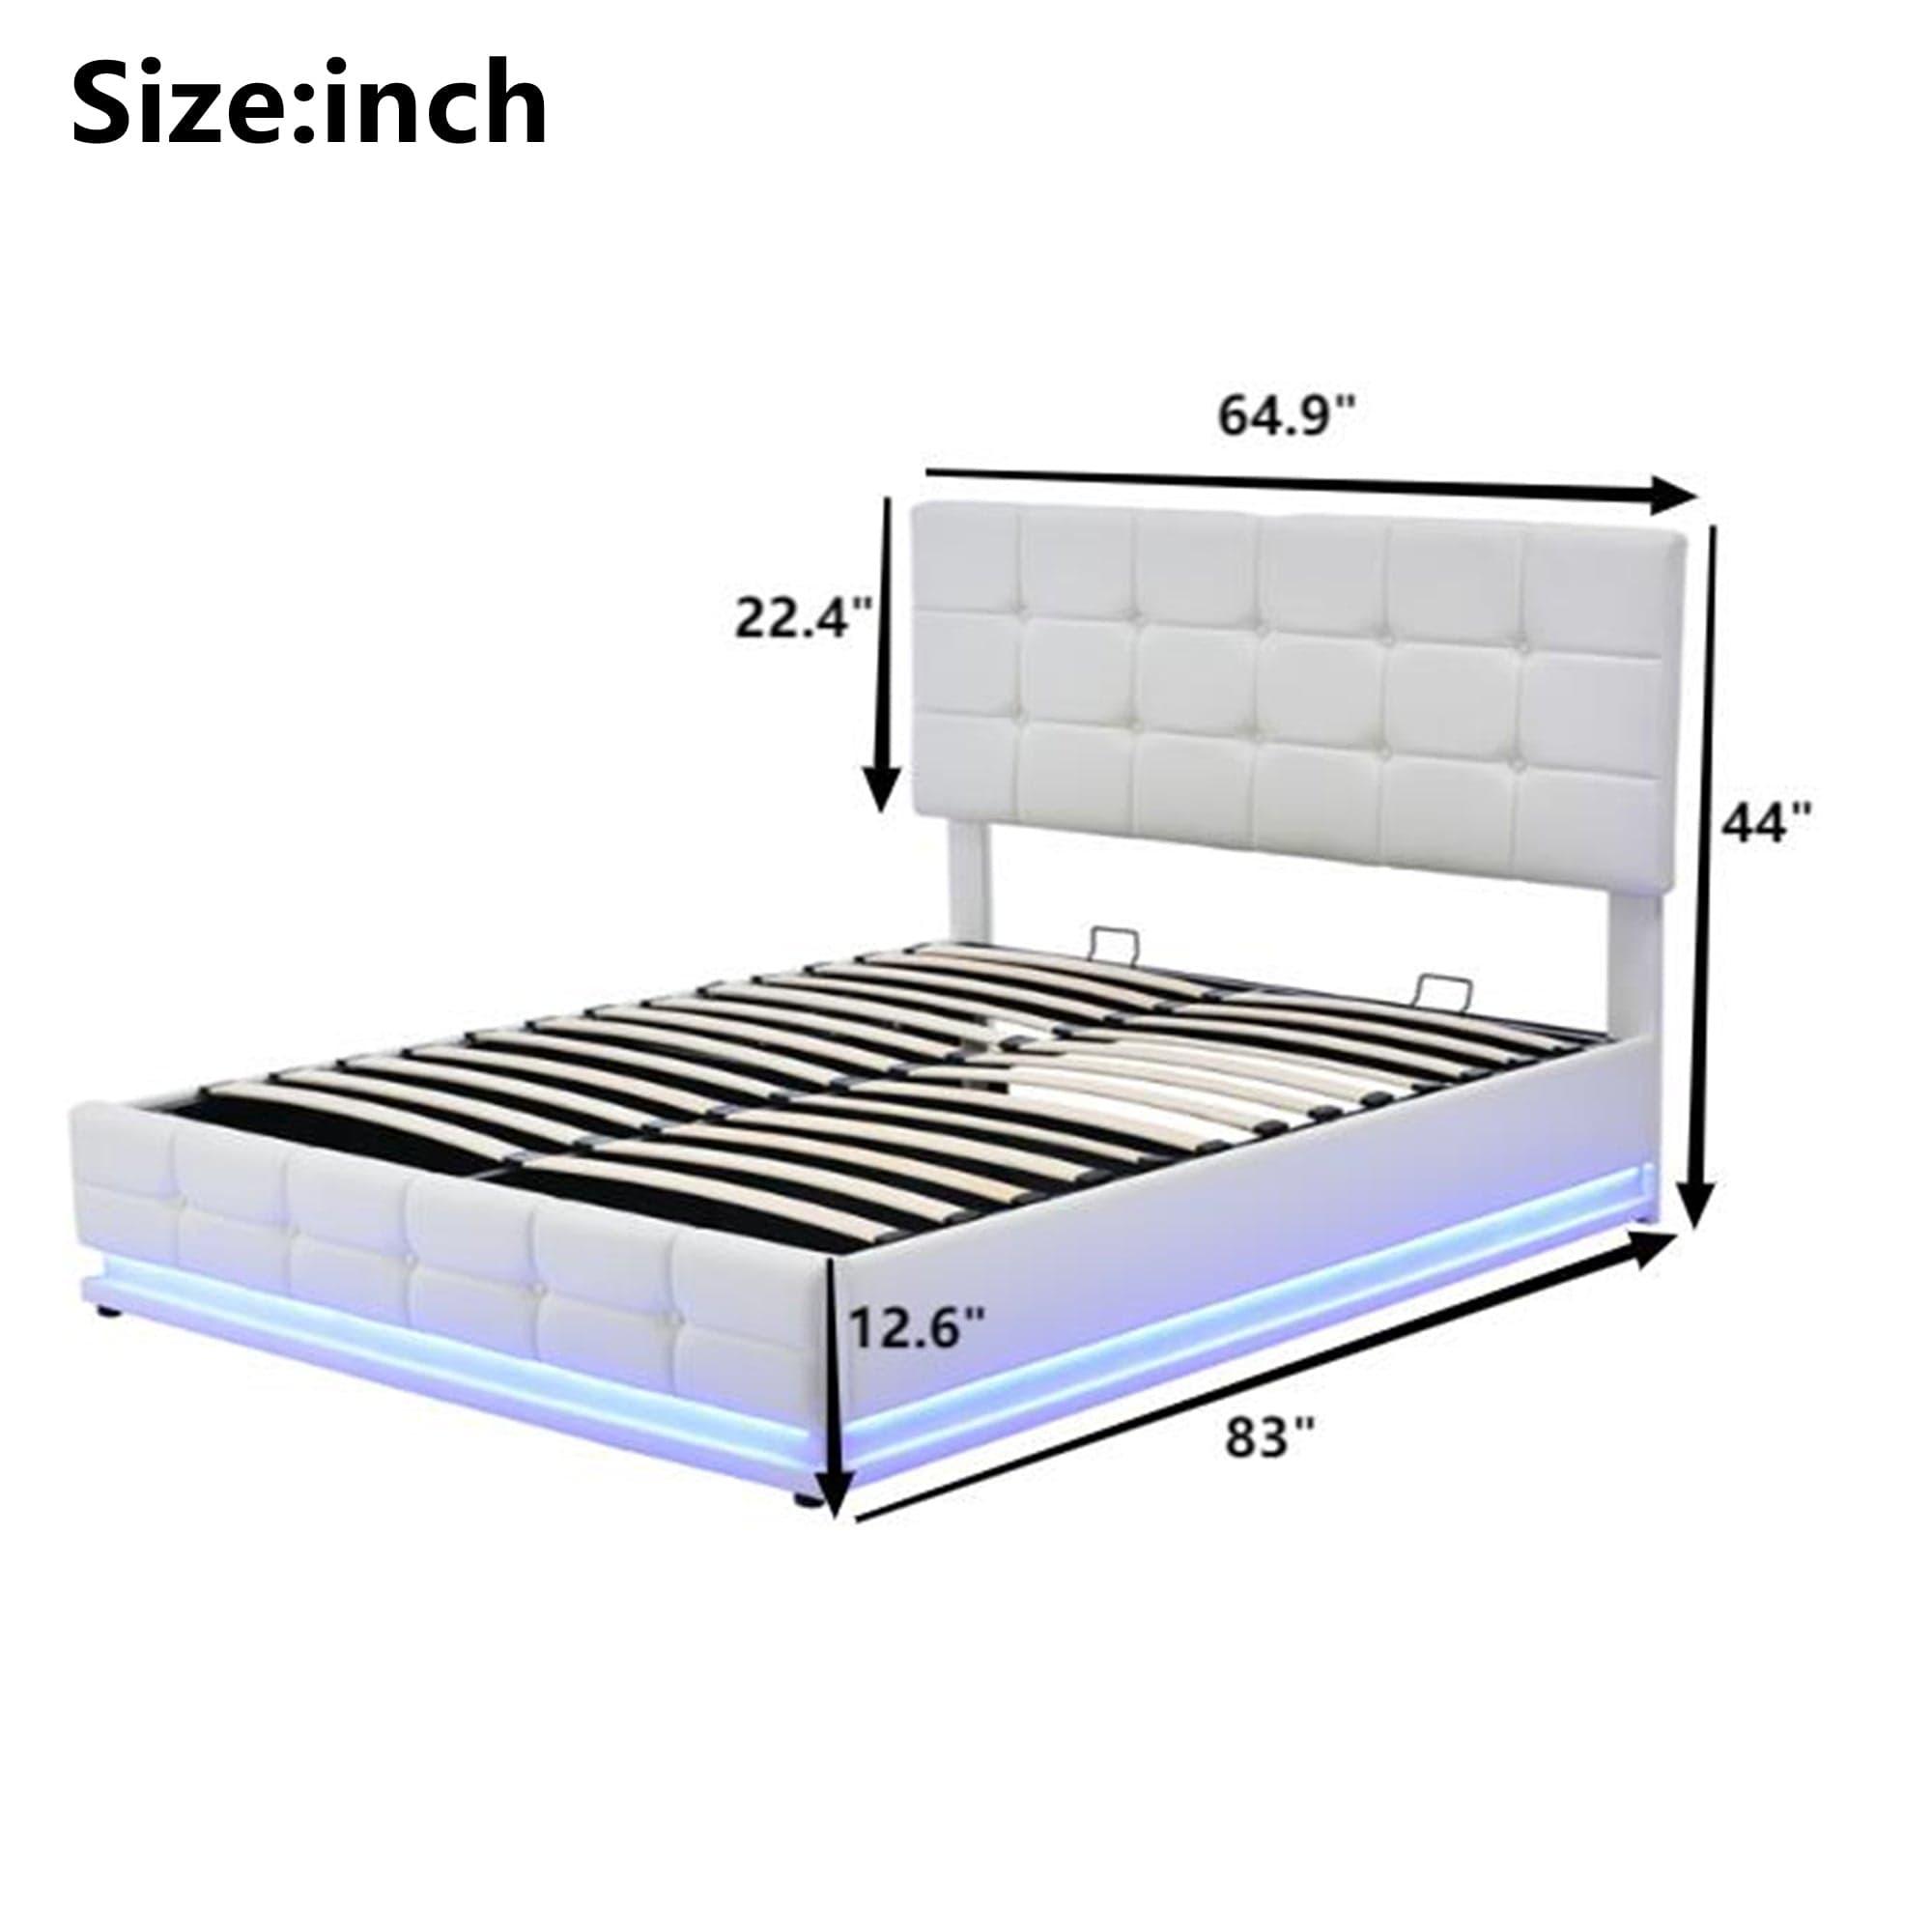 Shop Tufted Upholstered Platform Bed with Hydraulic Storage System,Queen Size PU Storage Bed with LED Lights and USB charger, White Mademoiselle Home Decor